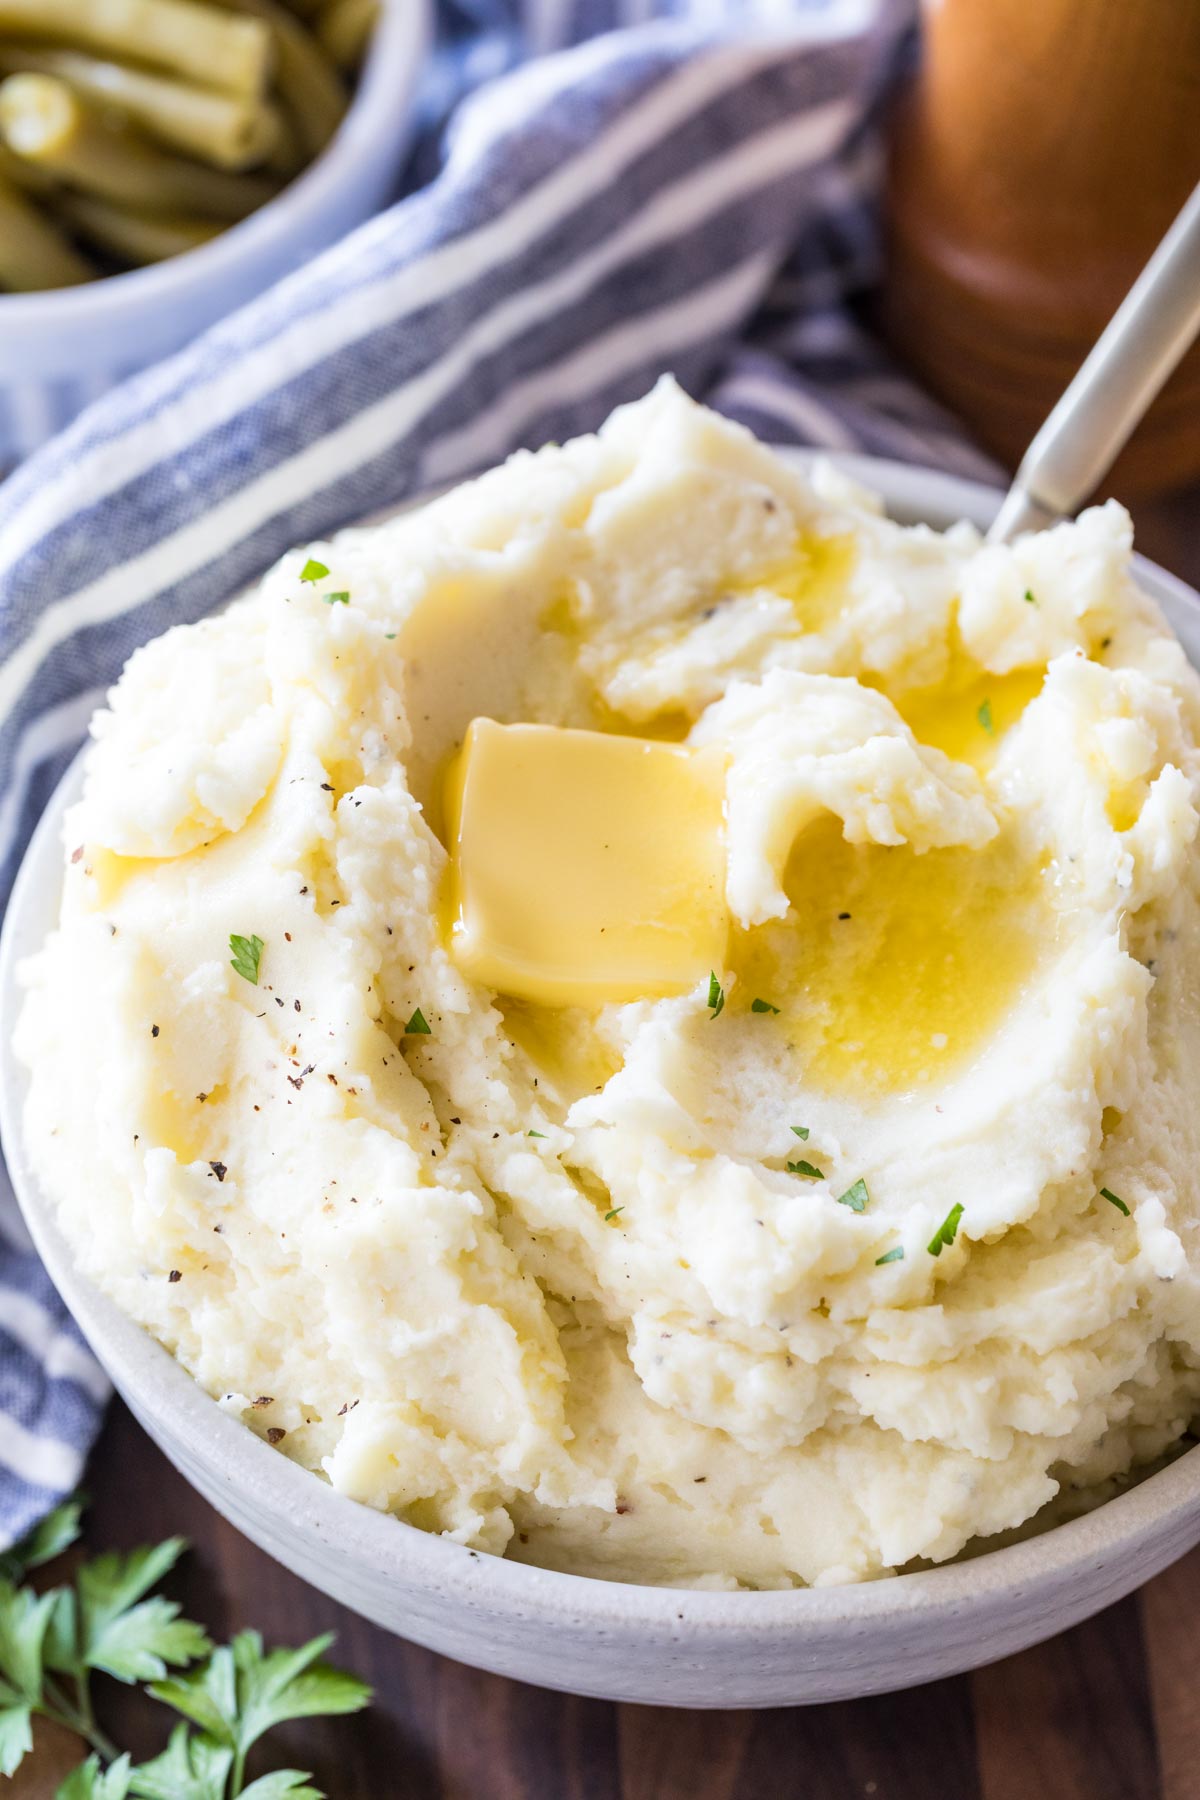 Mashed potatoes in a bowl with butter on top.